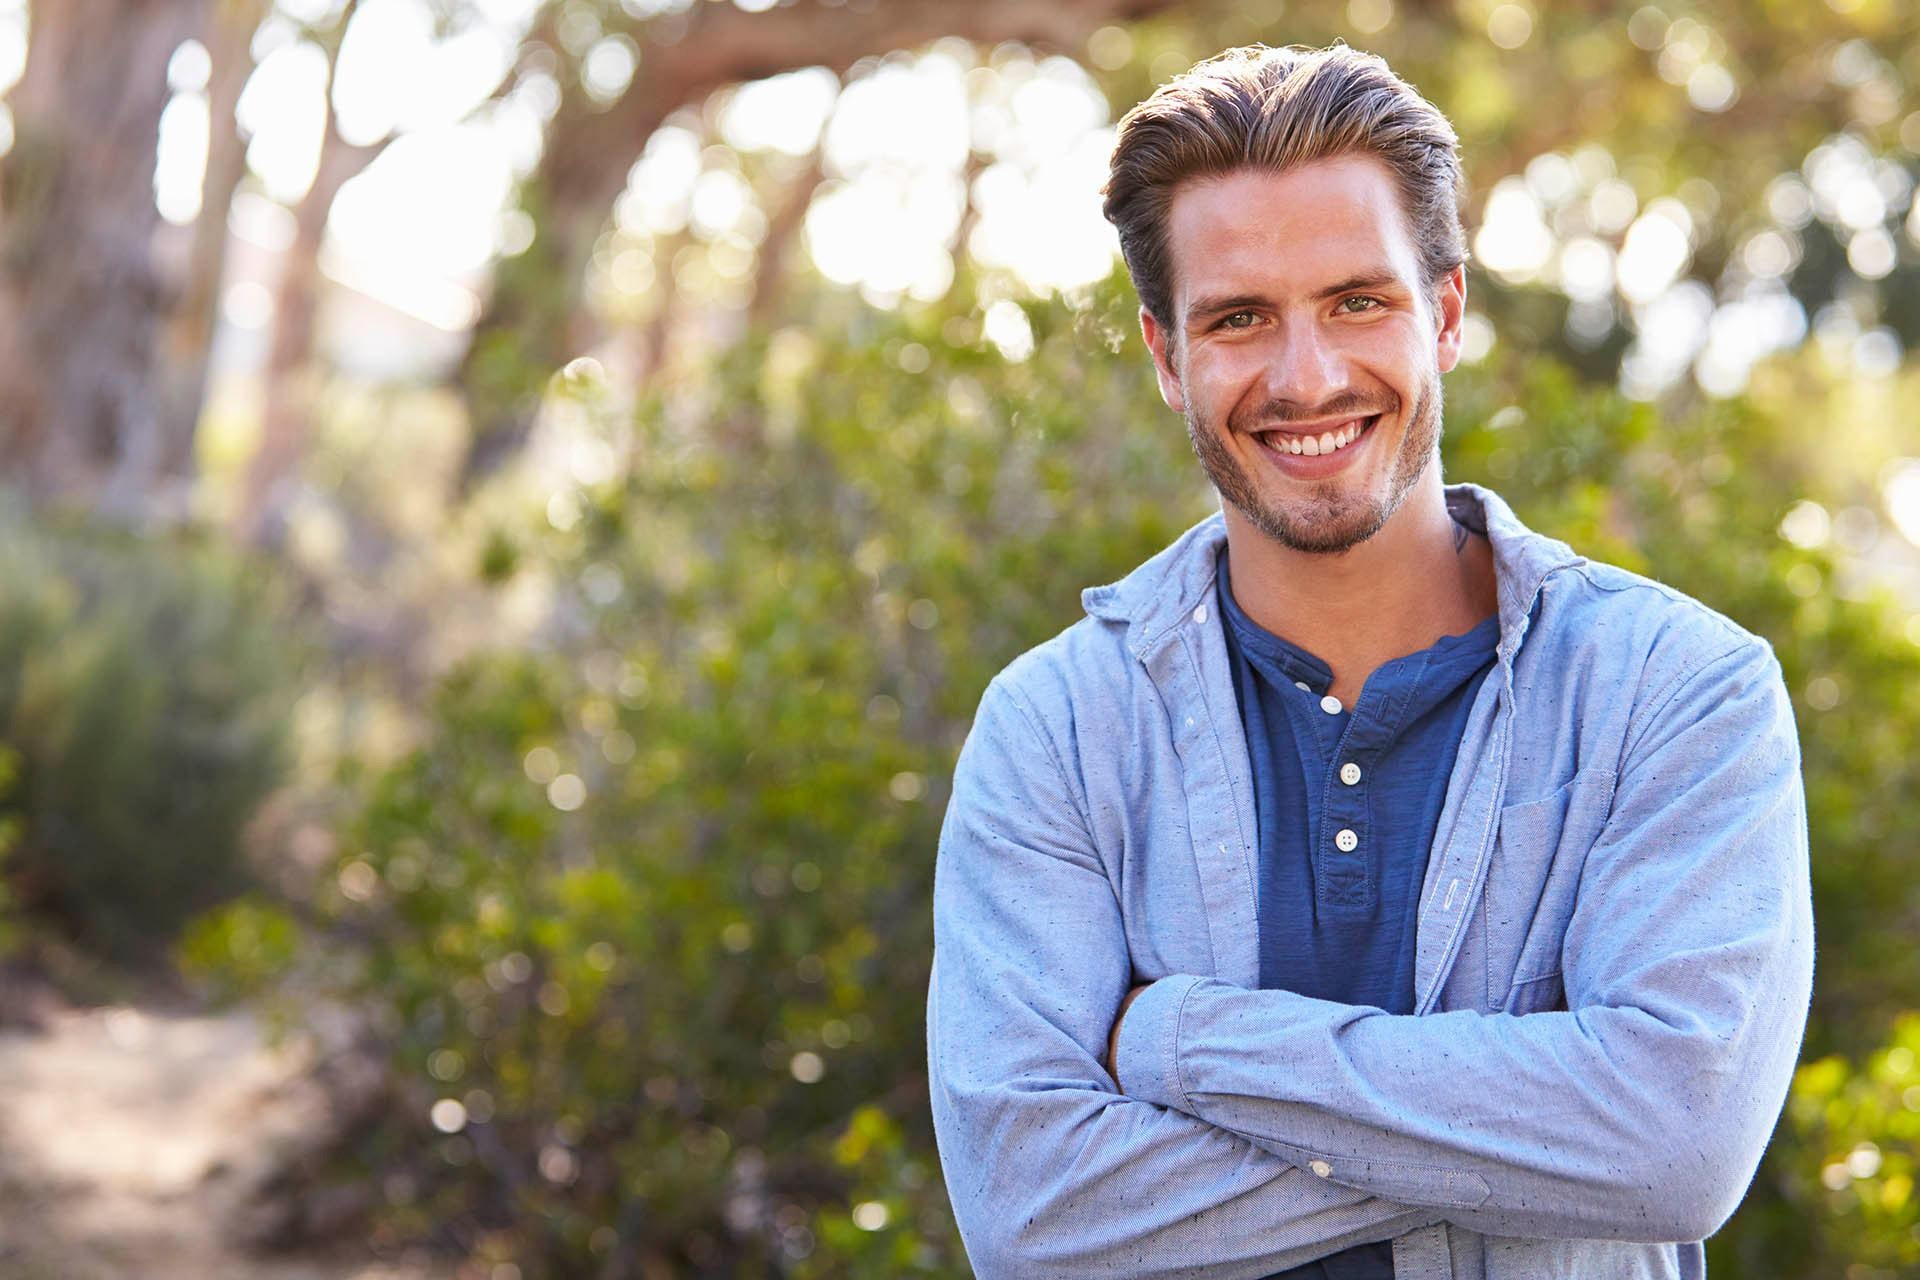 Man outdoors shows off his smile from the best dentist El Dorado Hills, CA